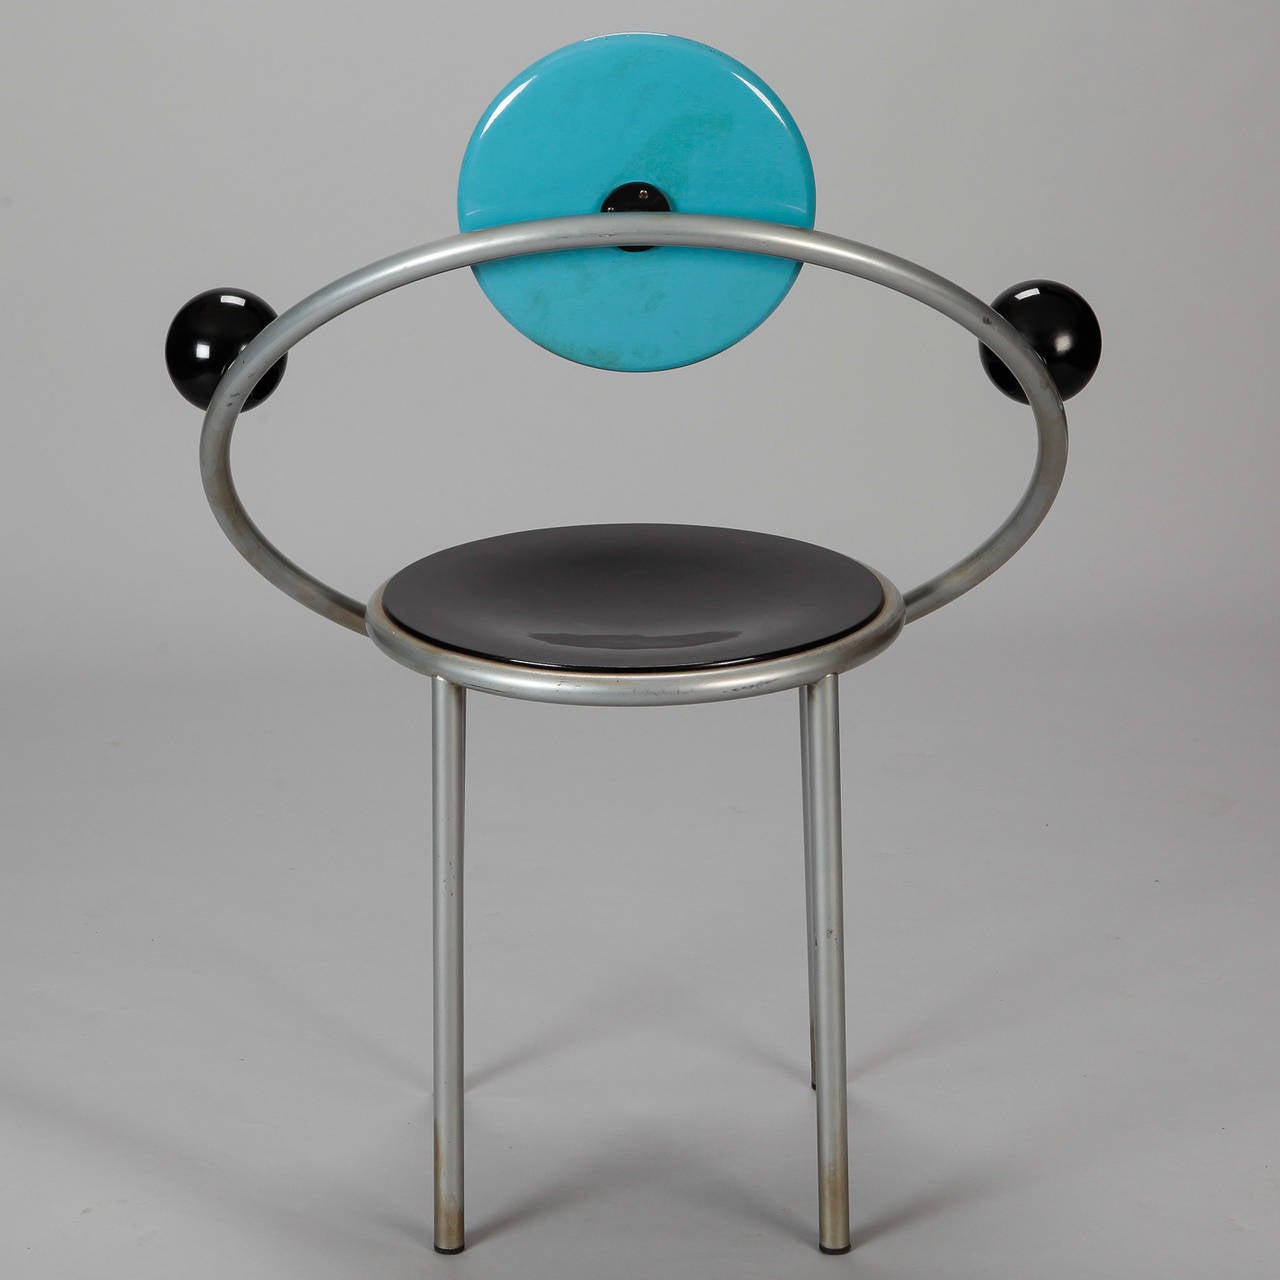 Metal Michele de Lucchi's First Chair for Memphis Milano, 1982